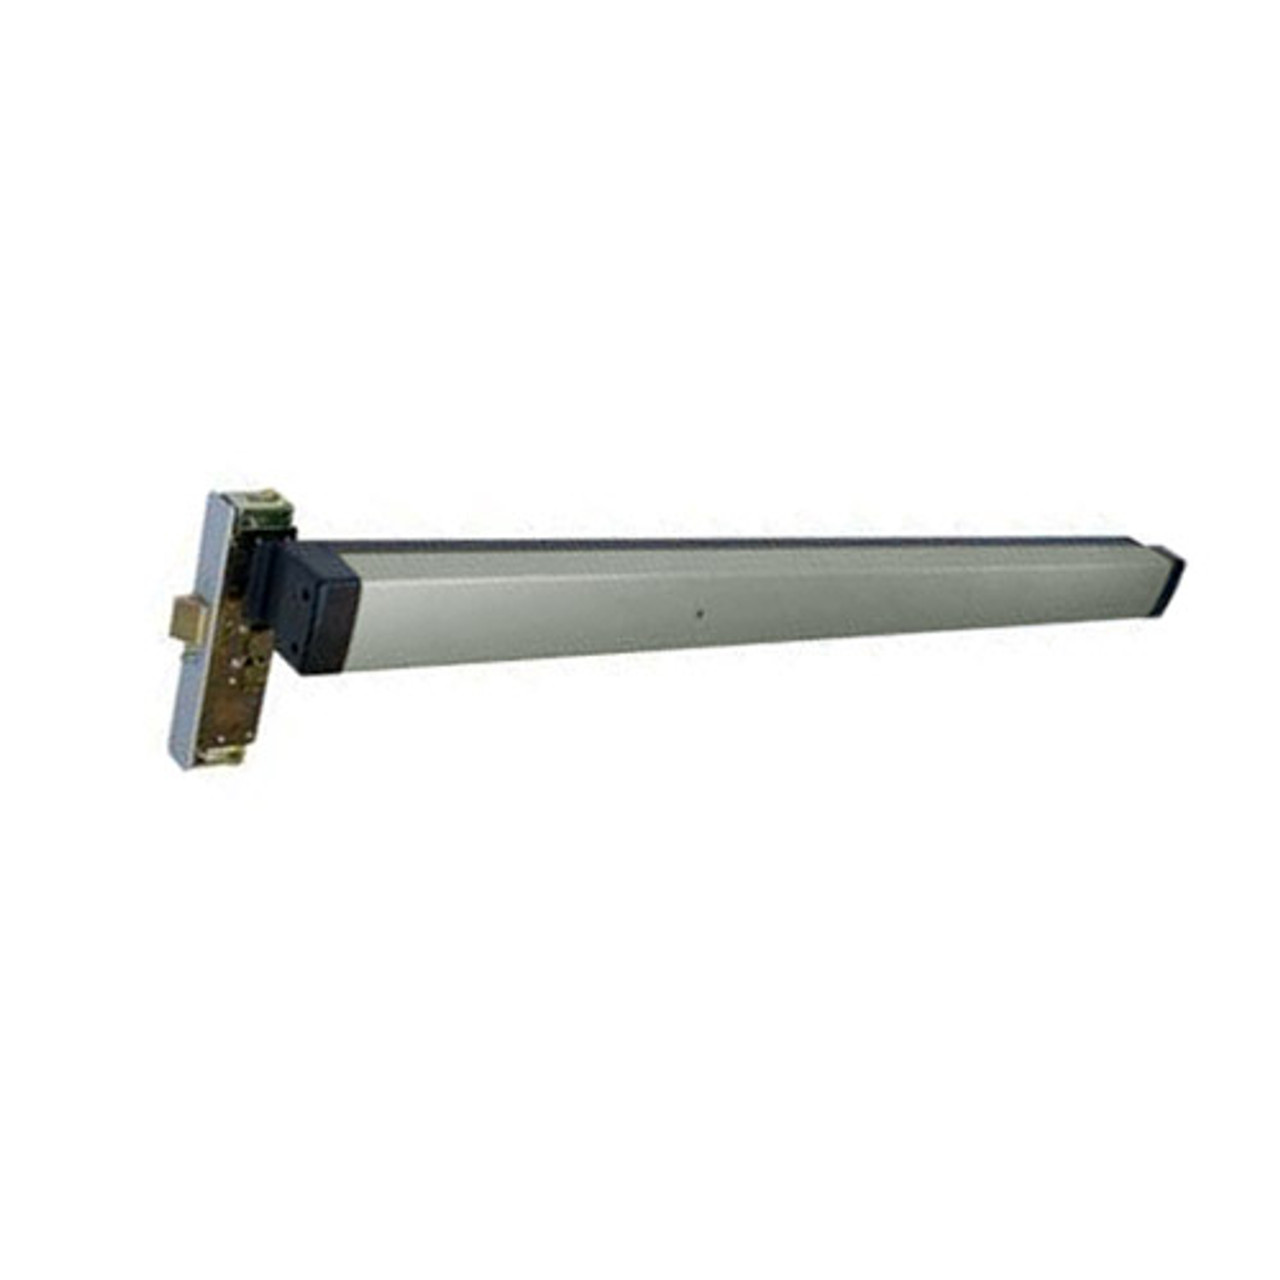 3300-80-30-US32 Adams Rite Mortise Exit Device